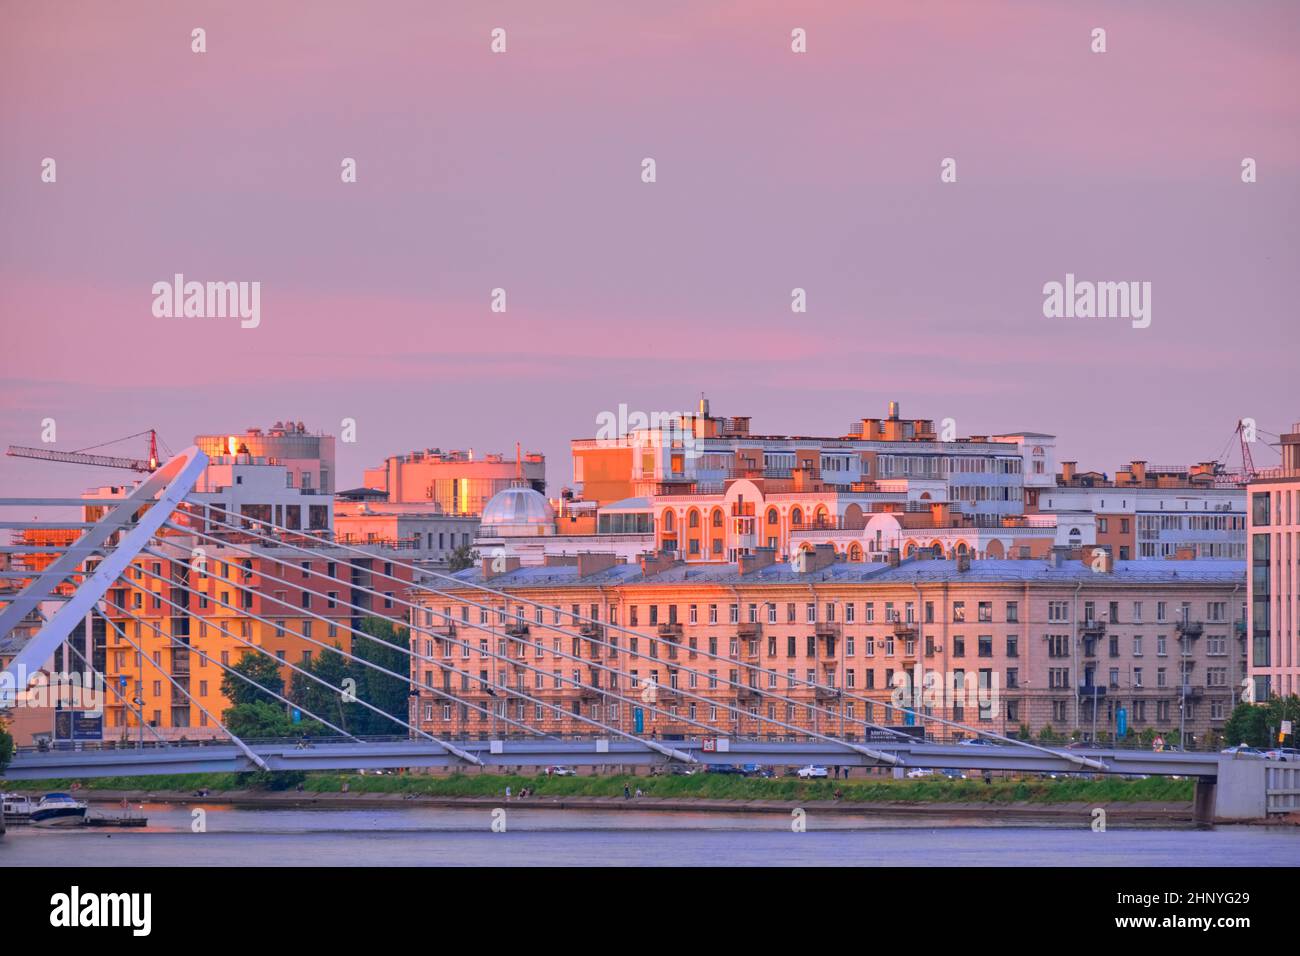 Saint-Petersburg, Russia - Jun 09, 2021: New houses in the Nevsky Bay area at sunset. Boats and boats move on the water Stock Photo